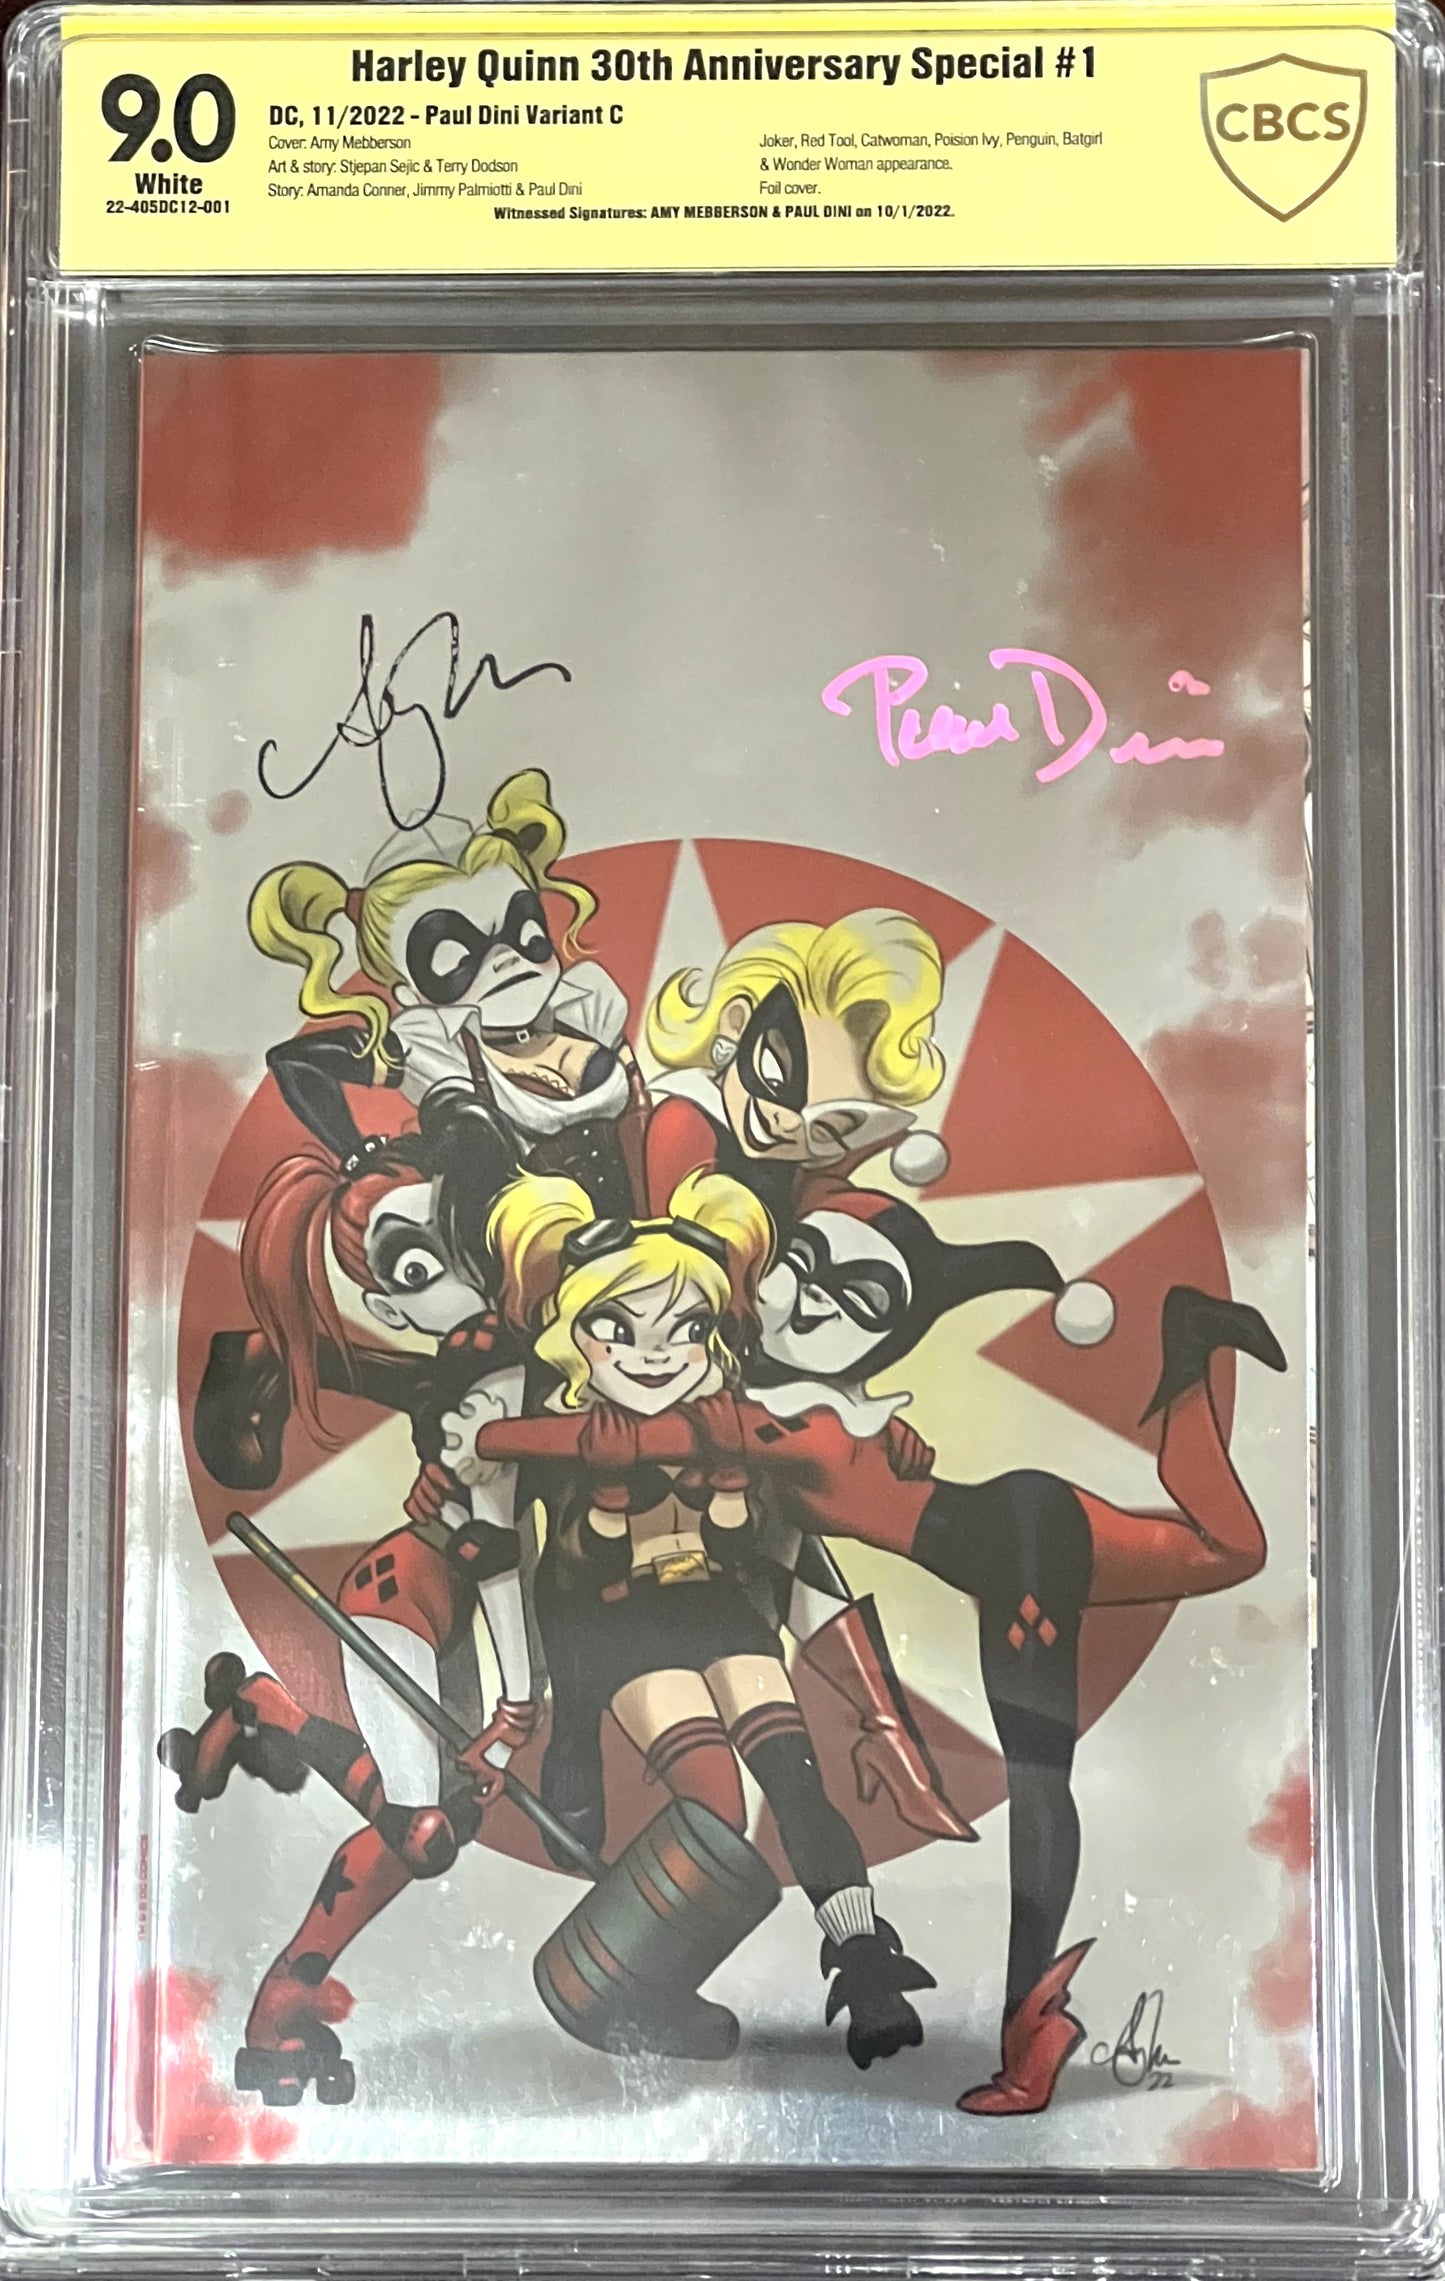 Harley Quinn 30th Anniversary Special #1. Paul Dini Variant. CBCS 9.0. Signed.